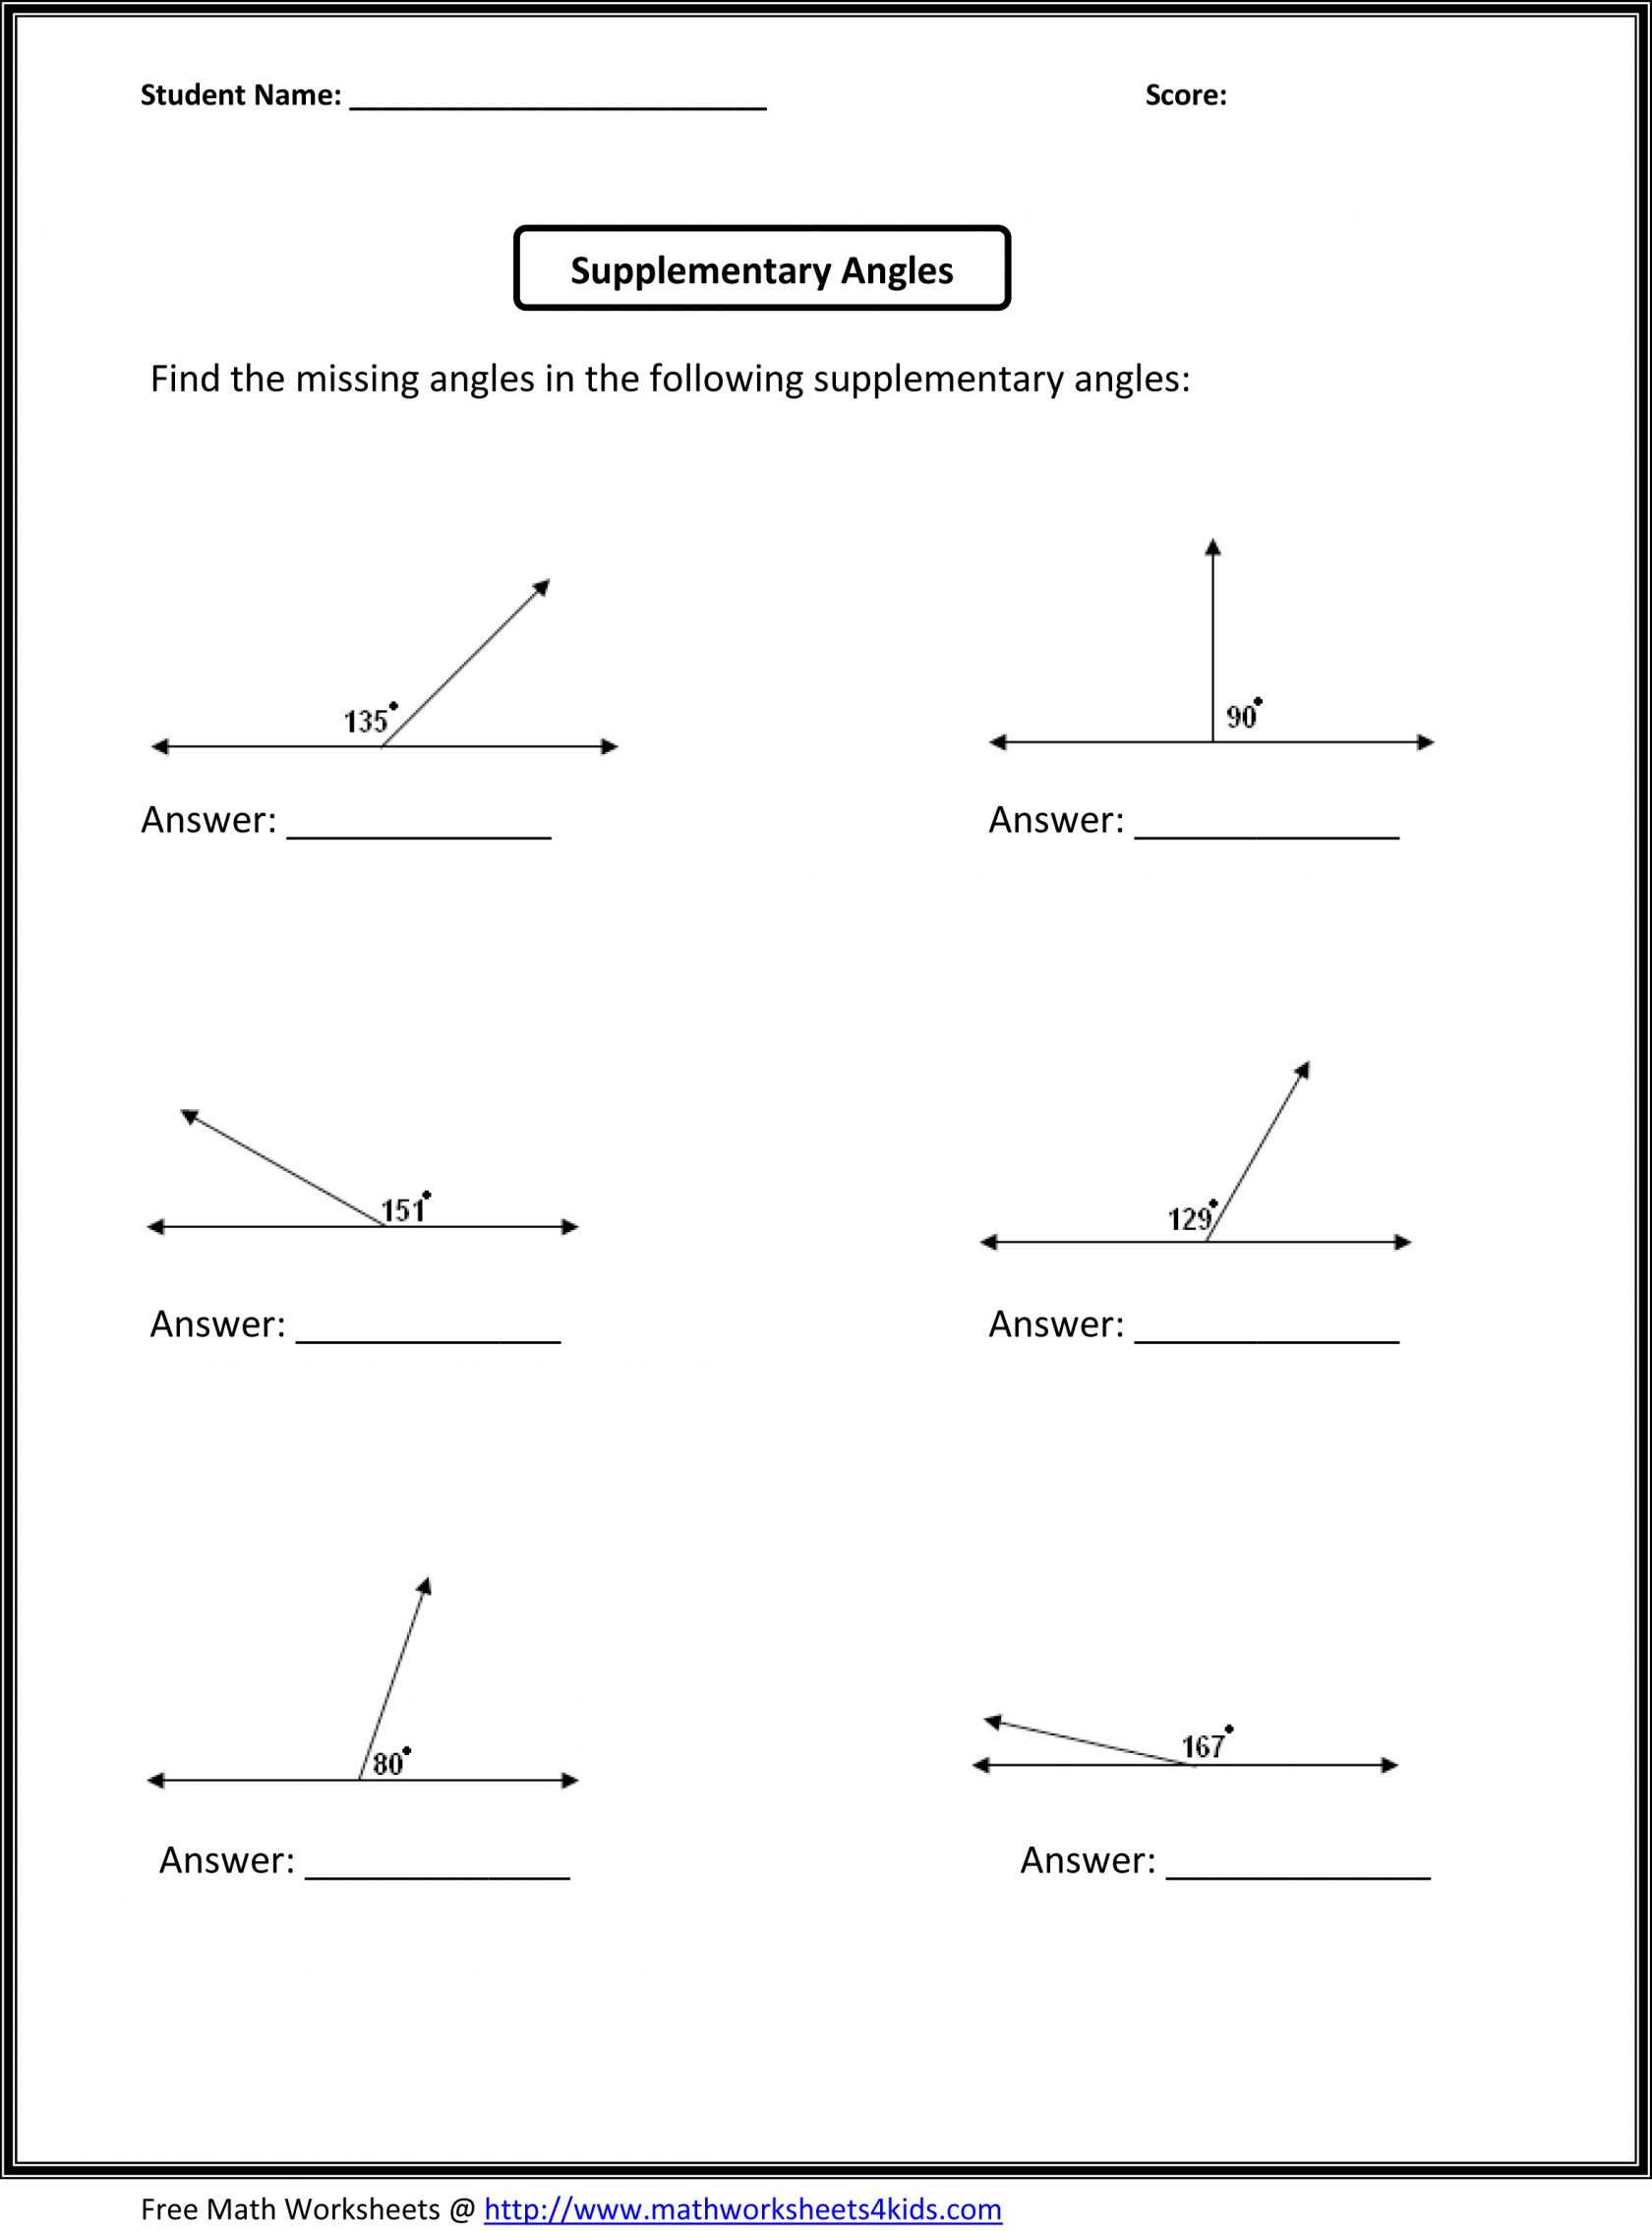 7th Grade Math Worksheets Free Printable with Answers together with Gcse Math Worksheets Choice Image Worksheet for Kids In English